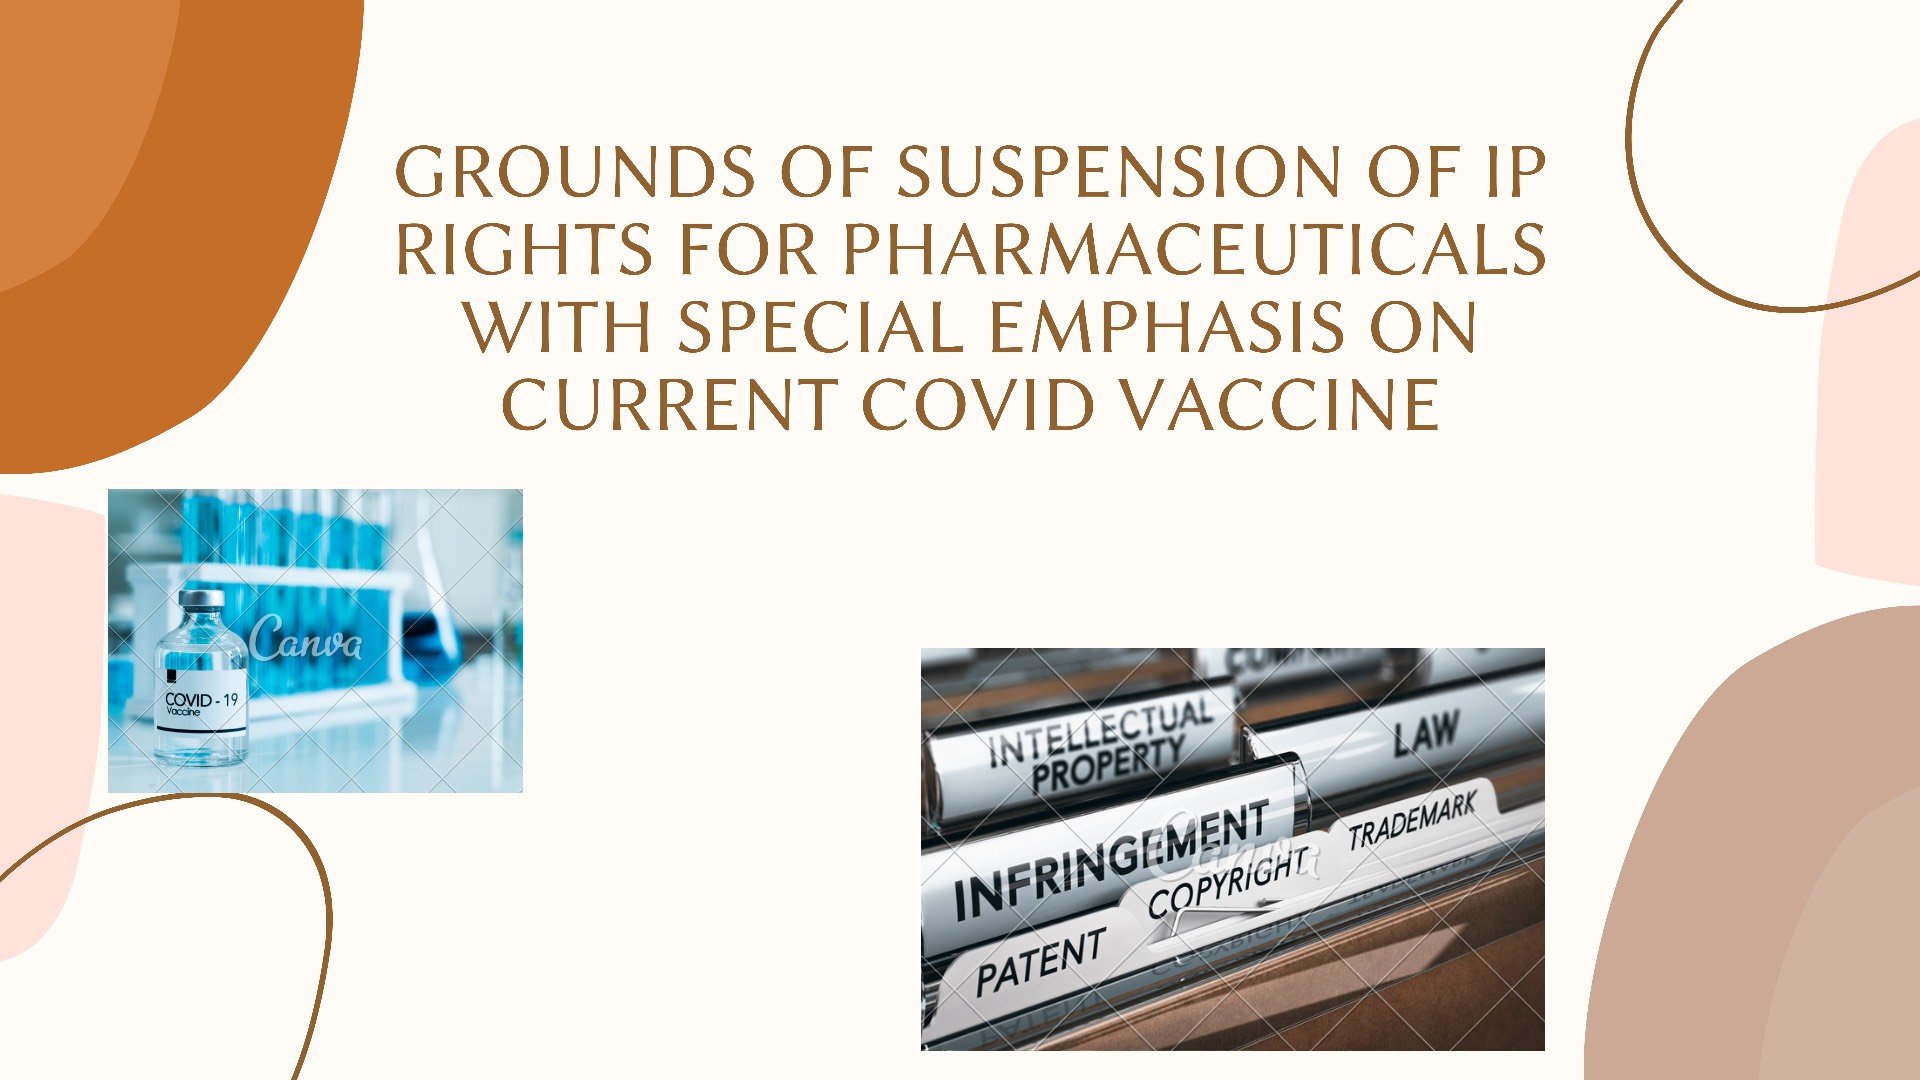 GROUNDS OF SUSPENSION OF IP RIGHTS FOR PHARMACEUTICALS WITH SPECIAL EMPHASIS ON CURRENT COVID VACCINE